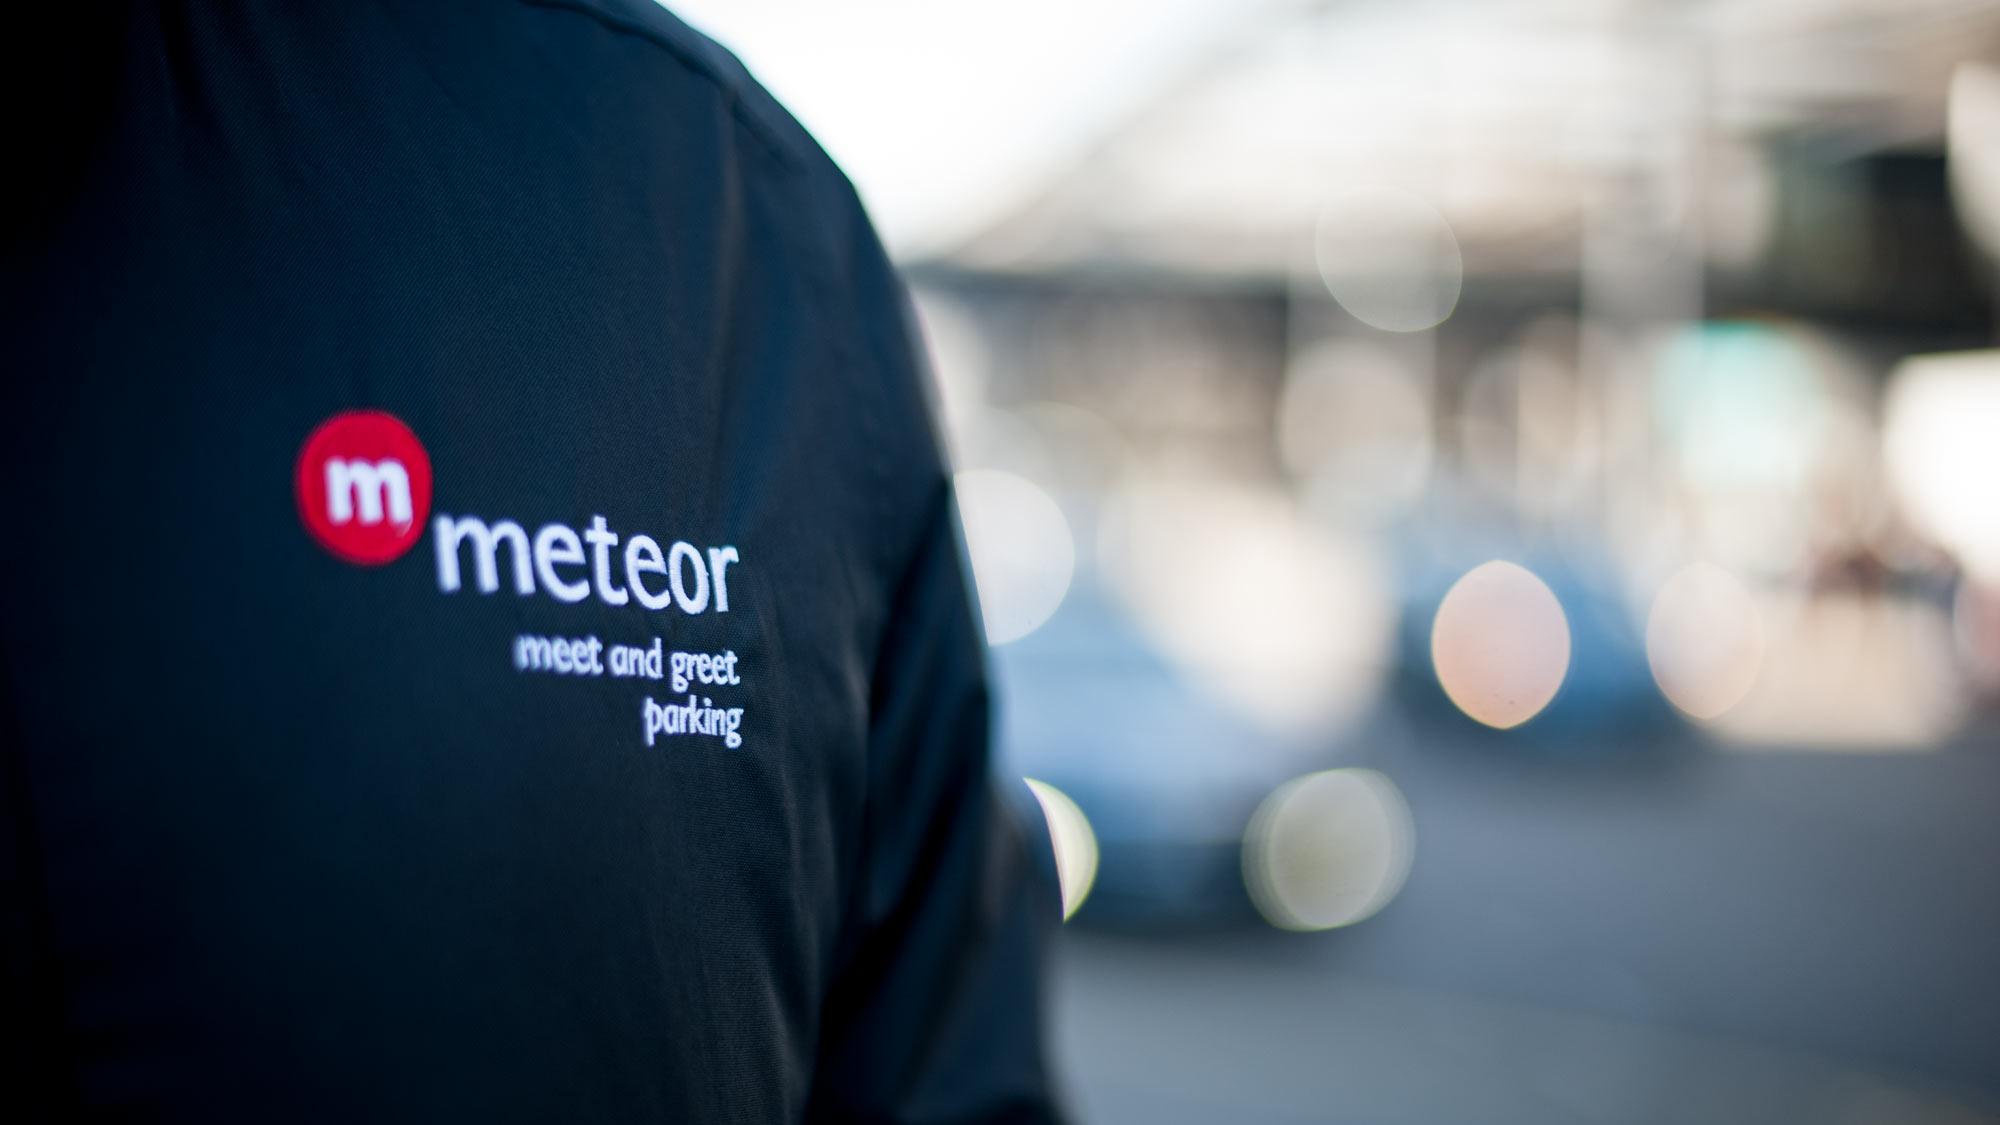 Meteor meet and greet focuses on customer for new website launch image